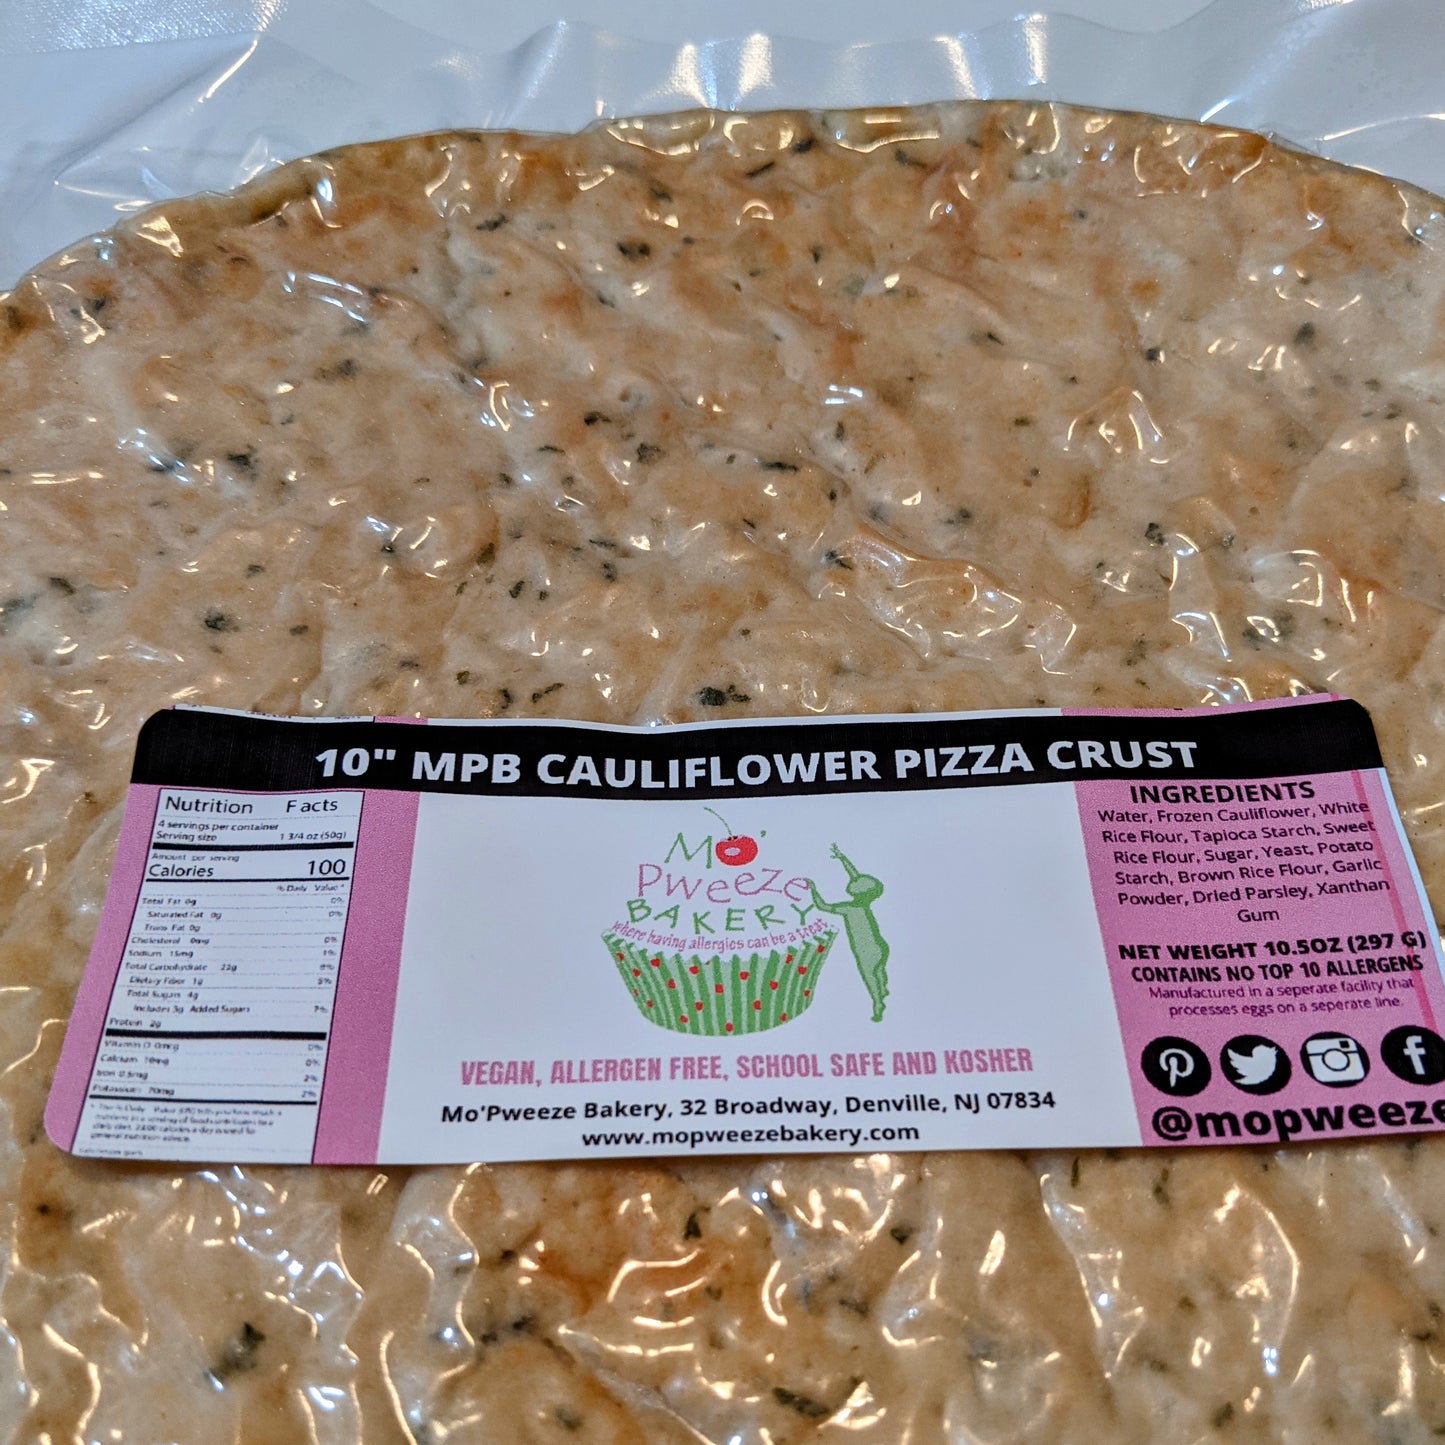 Make your own Pizza at home with our 10" Cauliflower Pizza Crust. Take it out of the freezer, top with your favorite sauce and toppings and pop in the over for an easy, allergen free pizza night